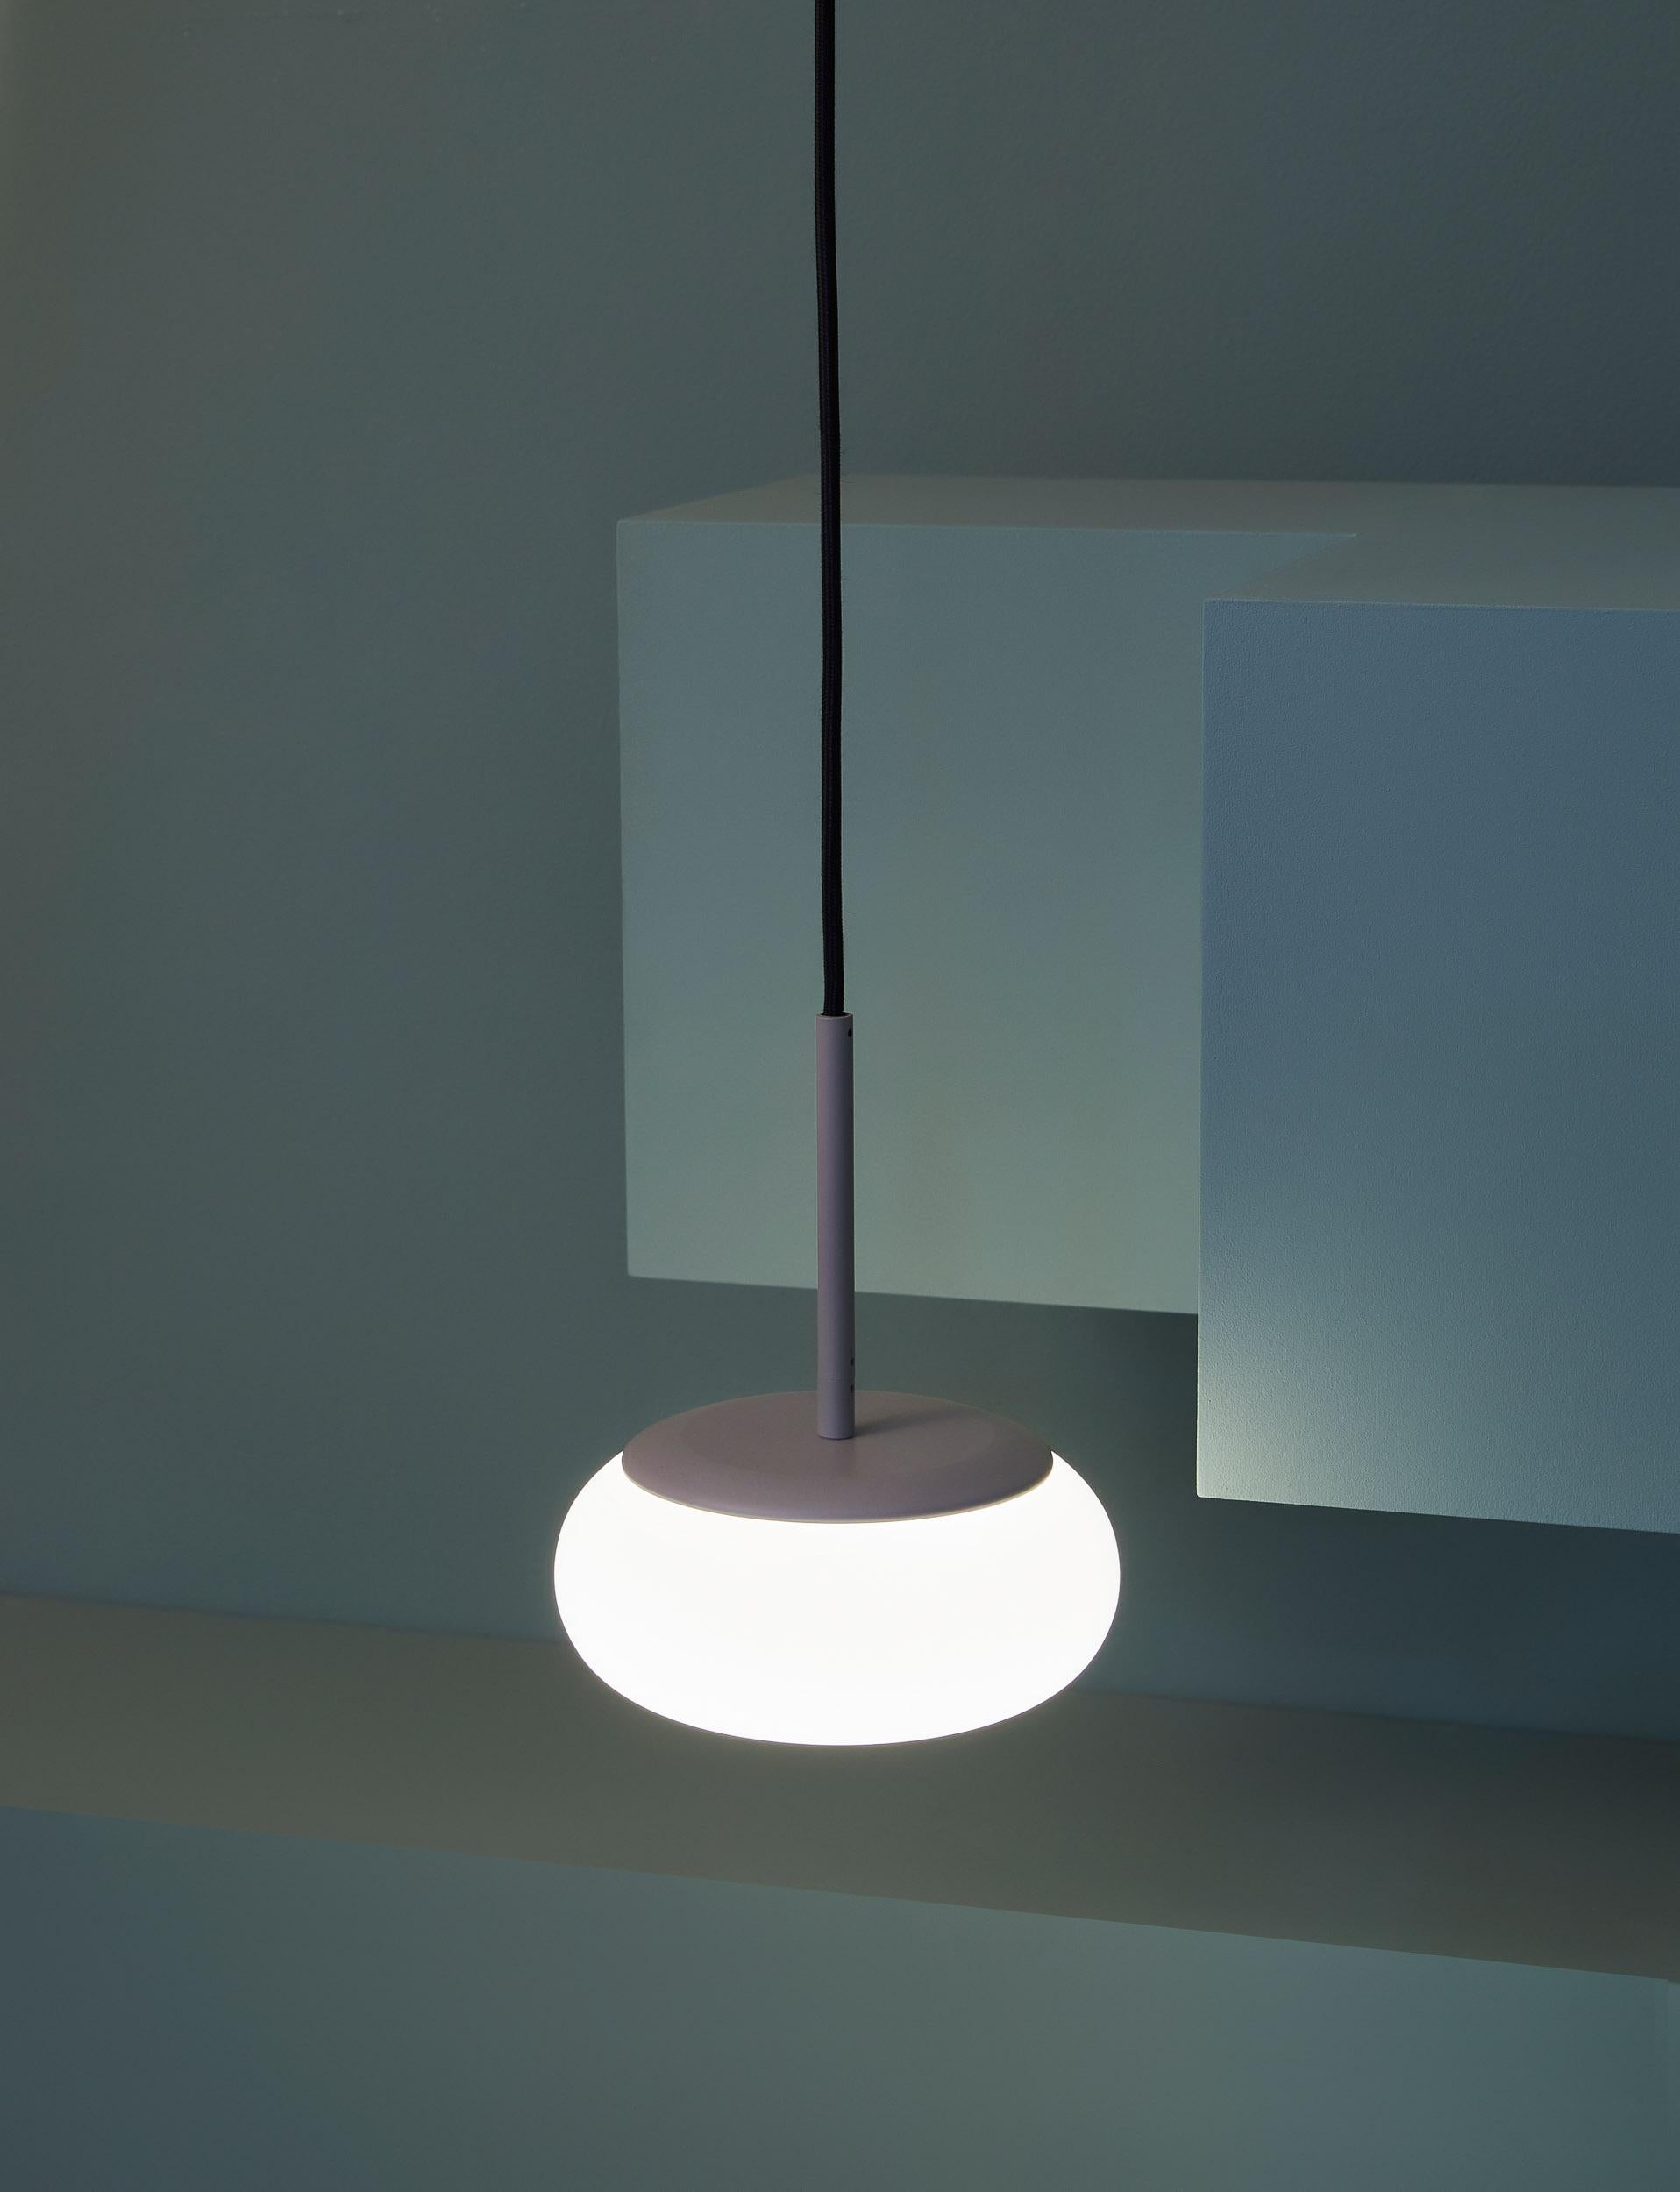 Mozzi Pendant Lamp by AGO Lighting
Small Terracotta

Opal glass, Steel, Aluminum Integrated LED (SMD), DC
Light source: Integrated LED (SMD), DC
Watt: 6 W
Color Temp. 2700 / 3000 K
Cable Lengths 3M
Ceiling cup Ø 90, H 40 mm

Two sizes